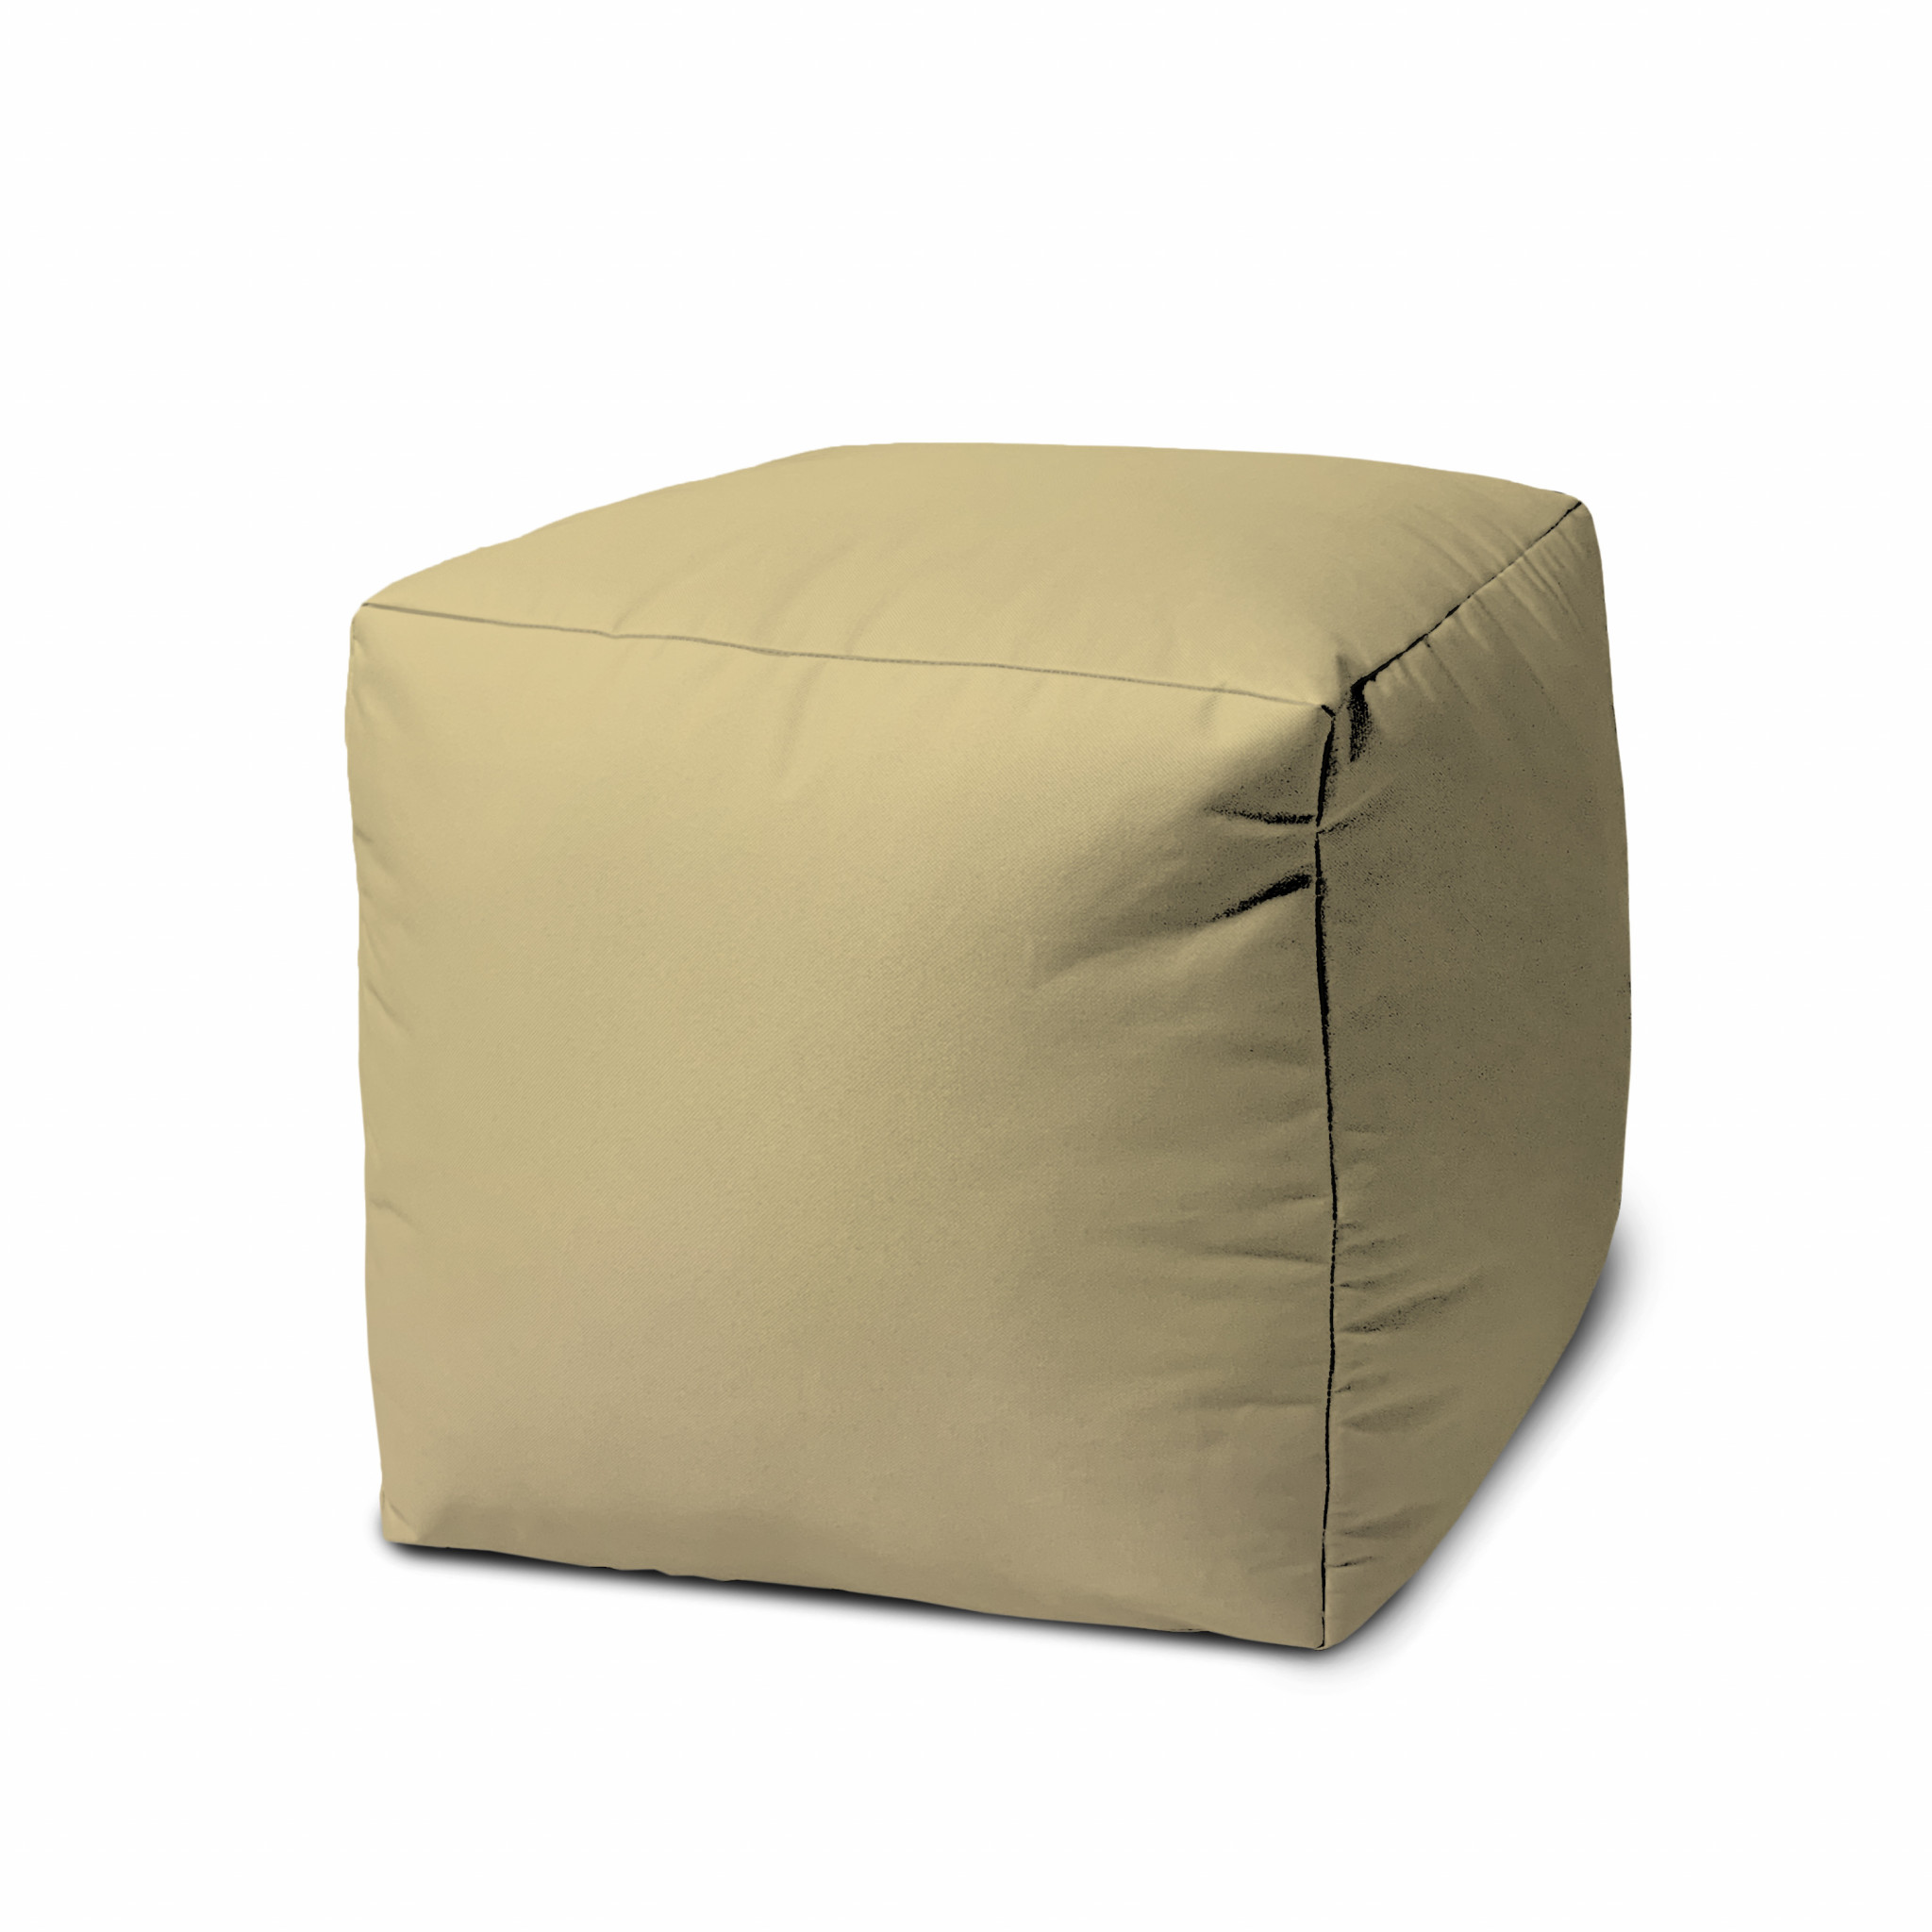 17 Cool Creamy Yellow Beige Solid Color Indoor Outdoor Pouf Ottoman